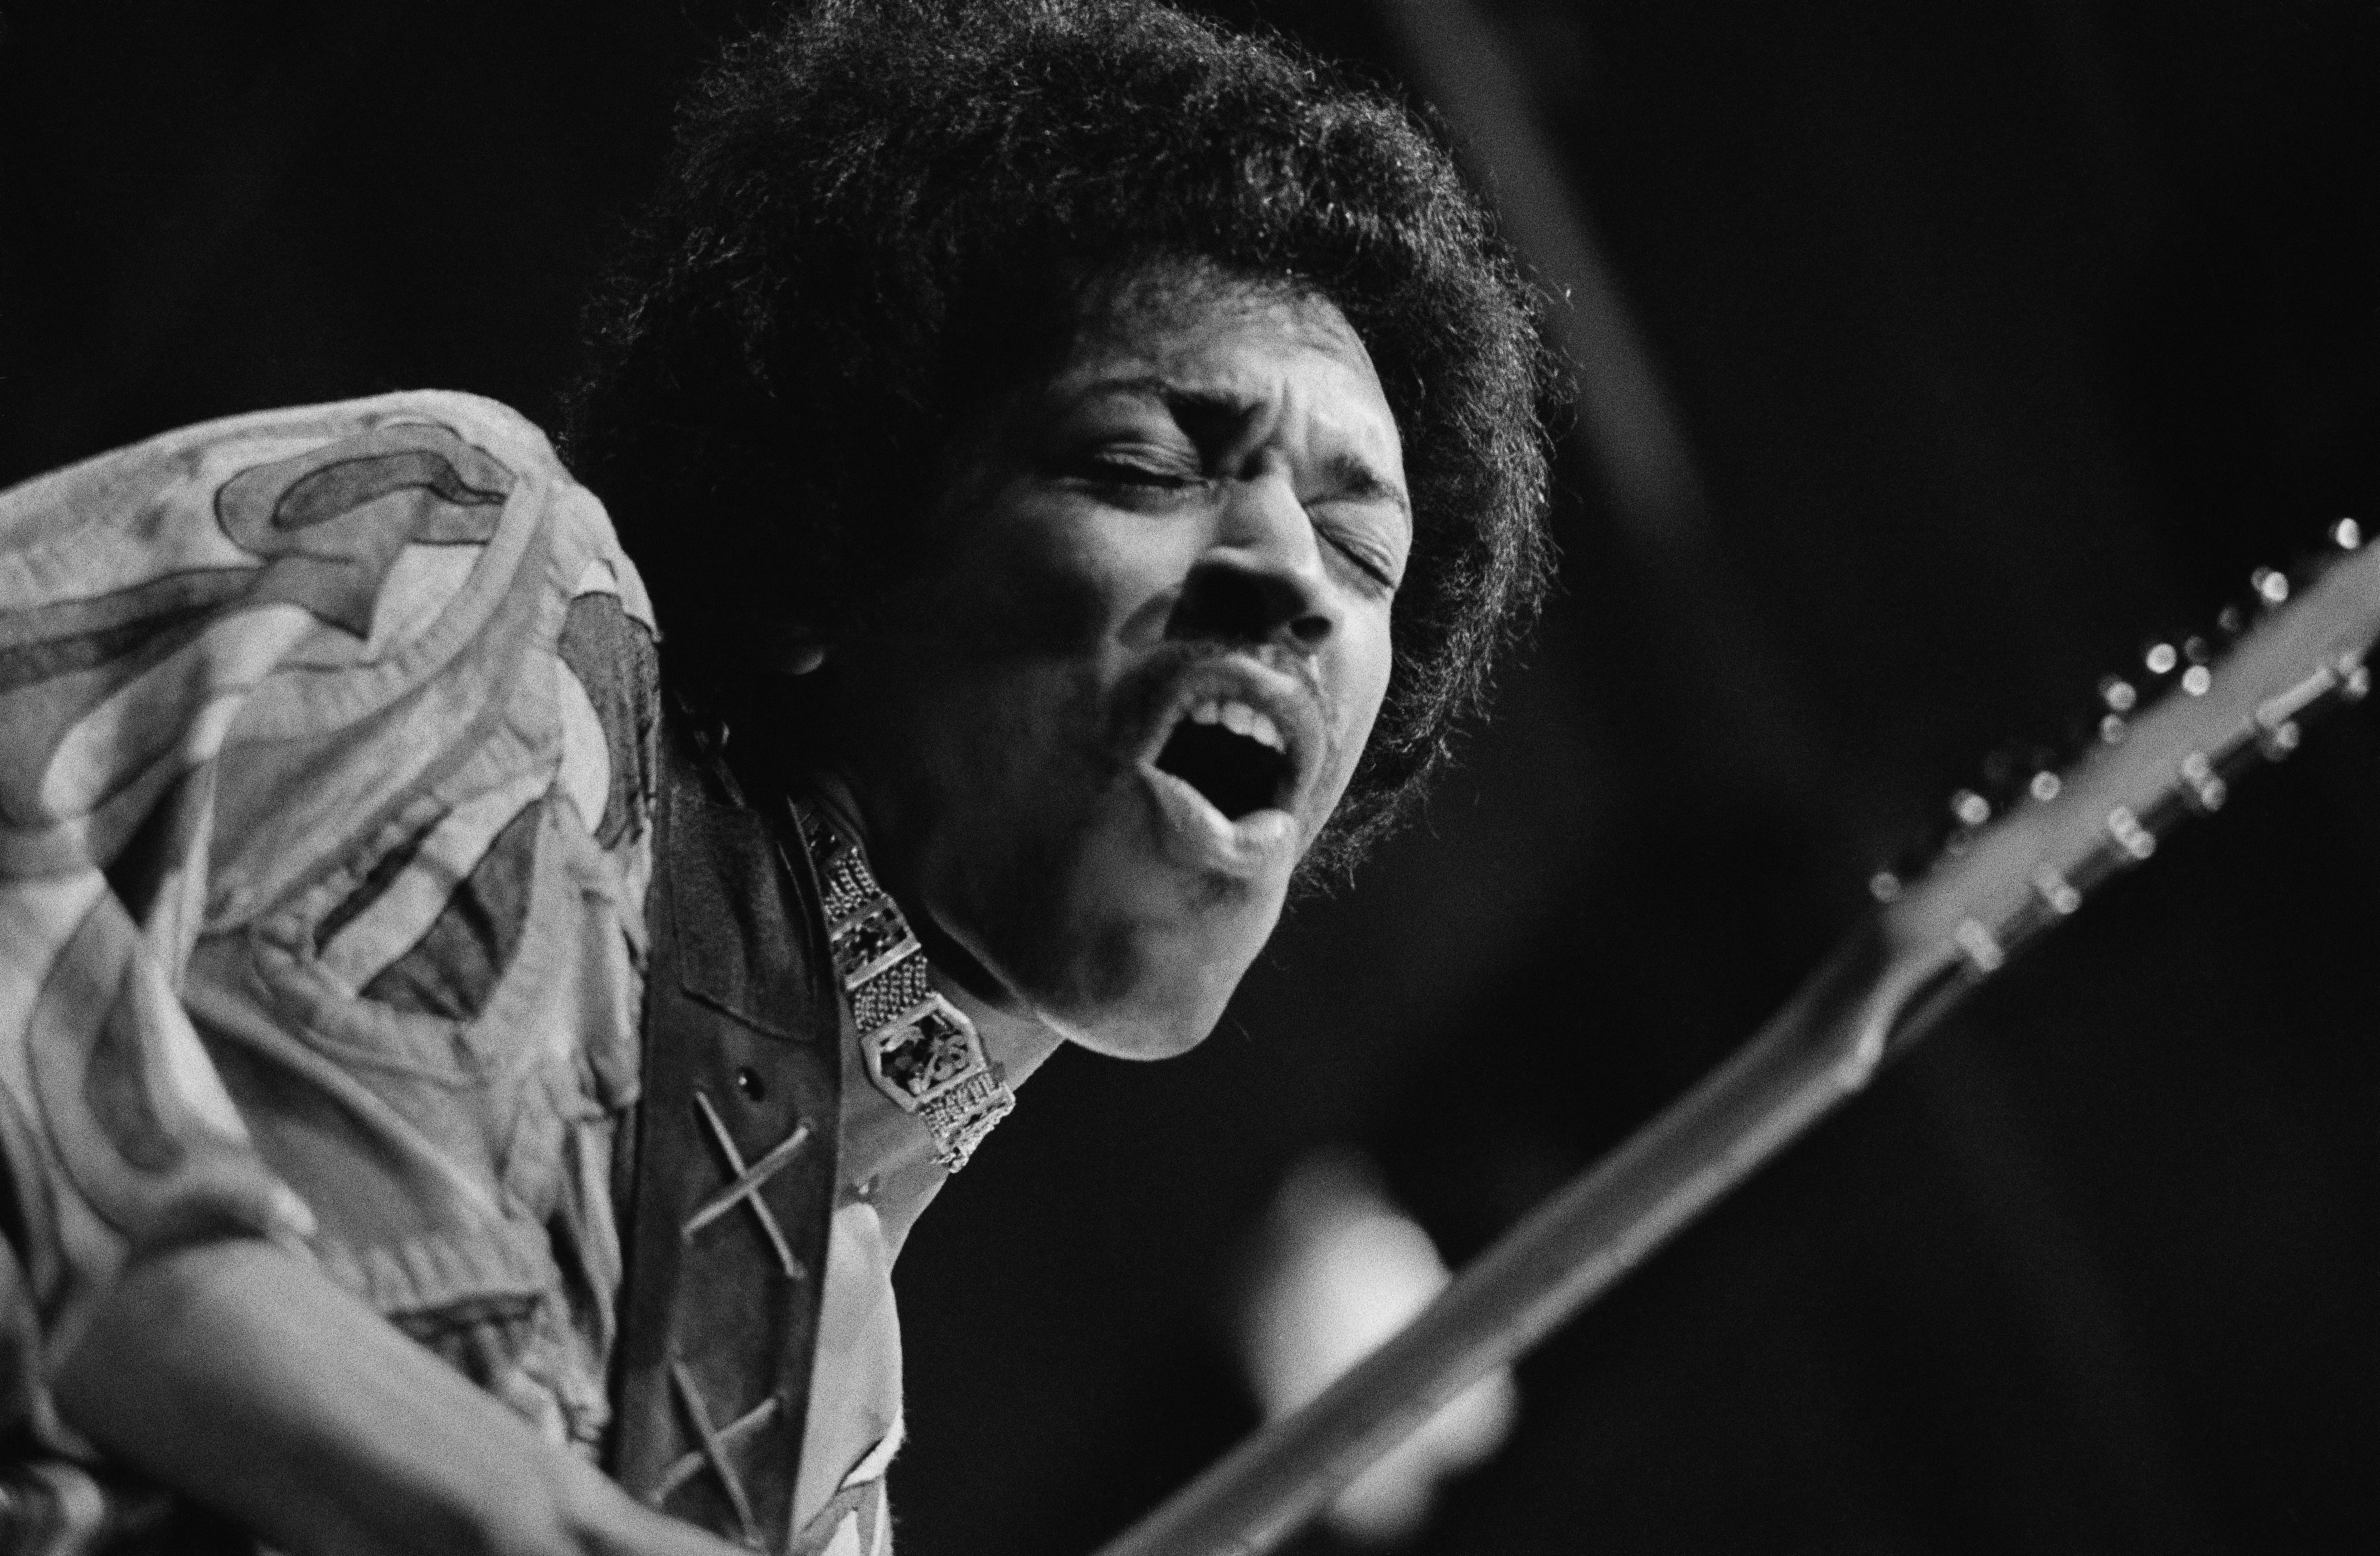 50 years later, a new Hendrix song emerges